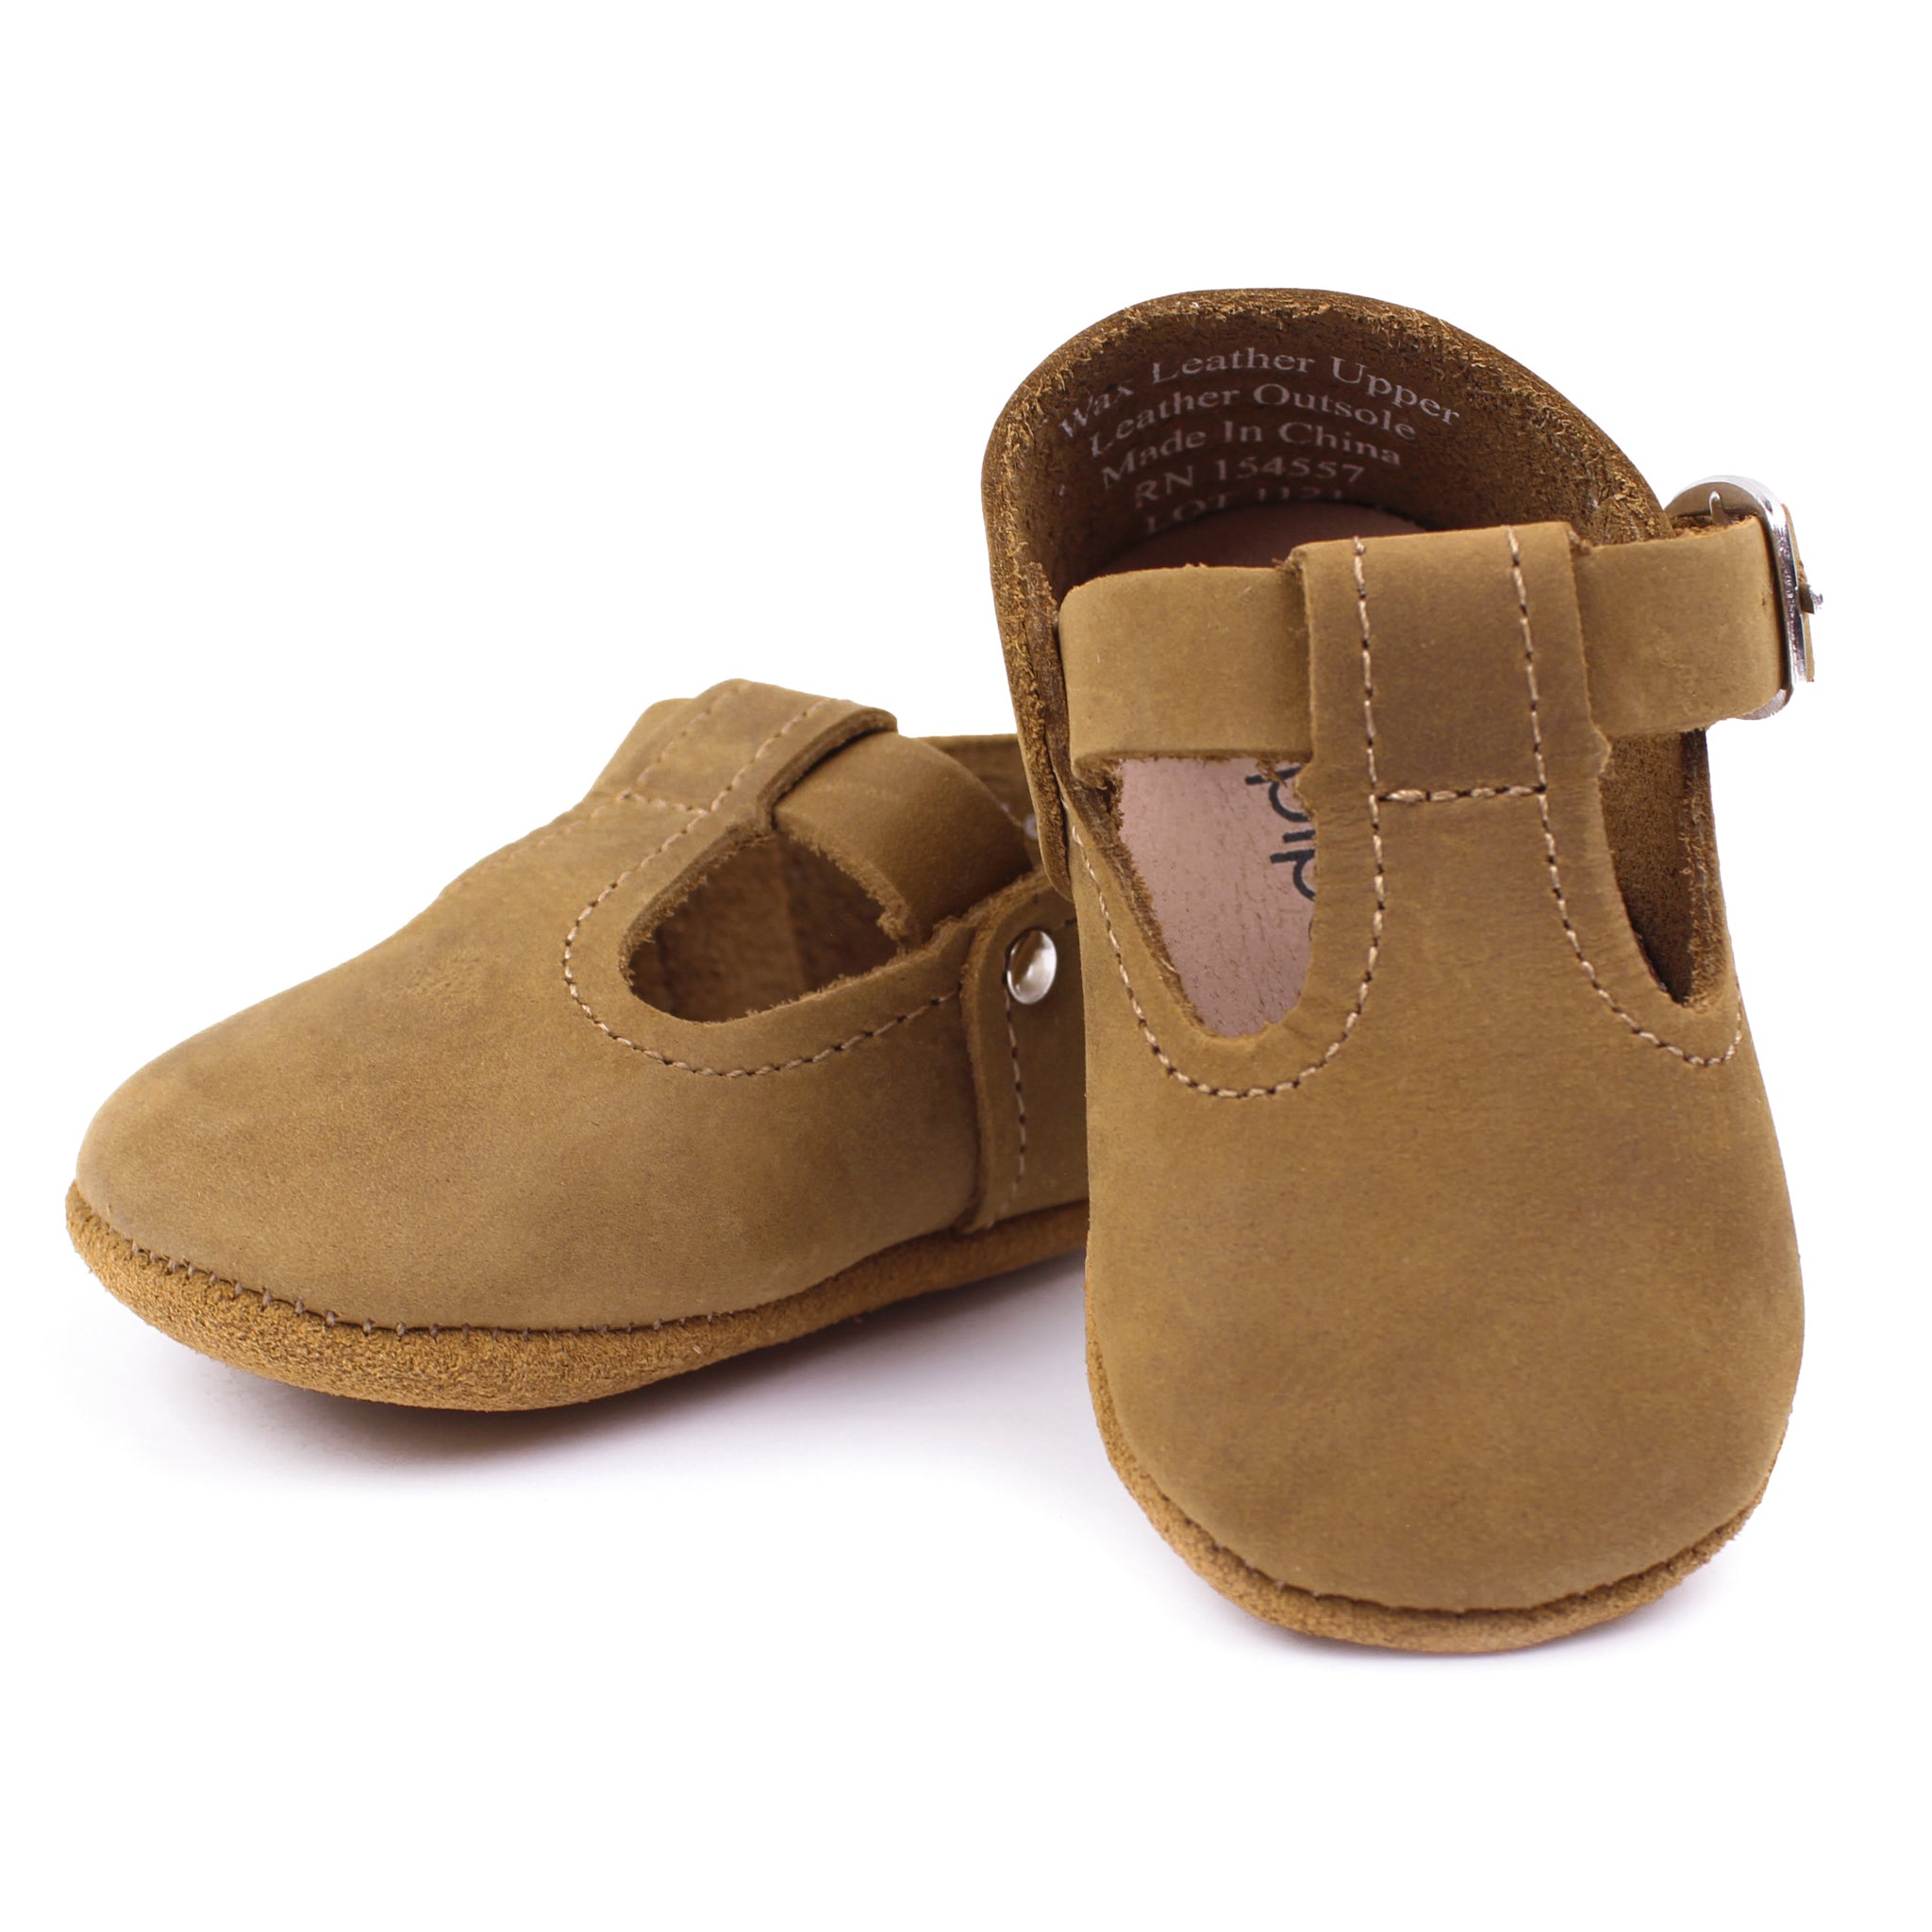 Piper Finn - Baby & Toddler Girl Shoes - T-Strap Mary Jane - Brown ...